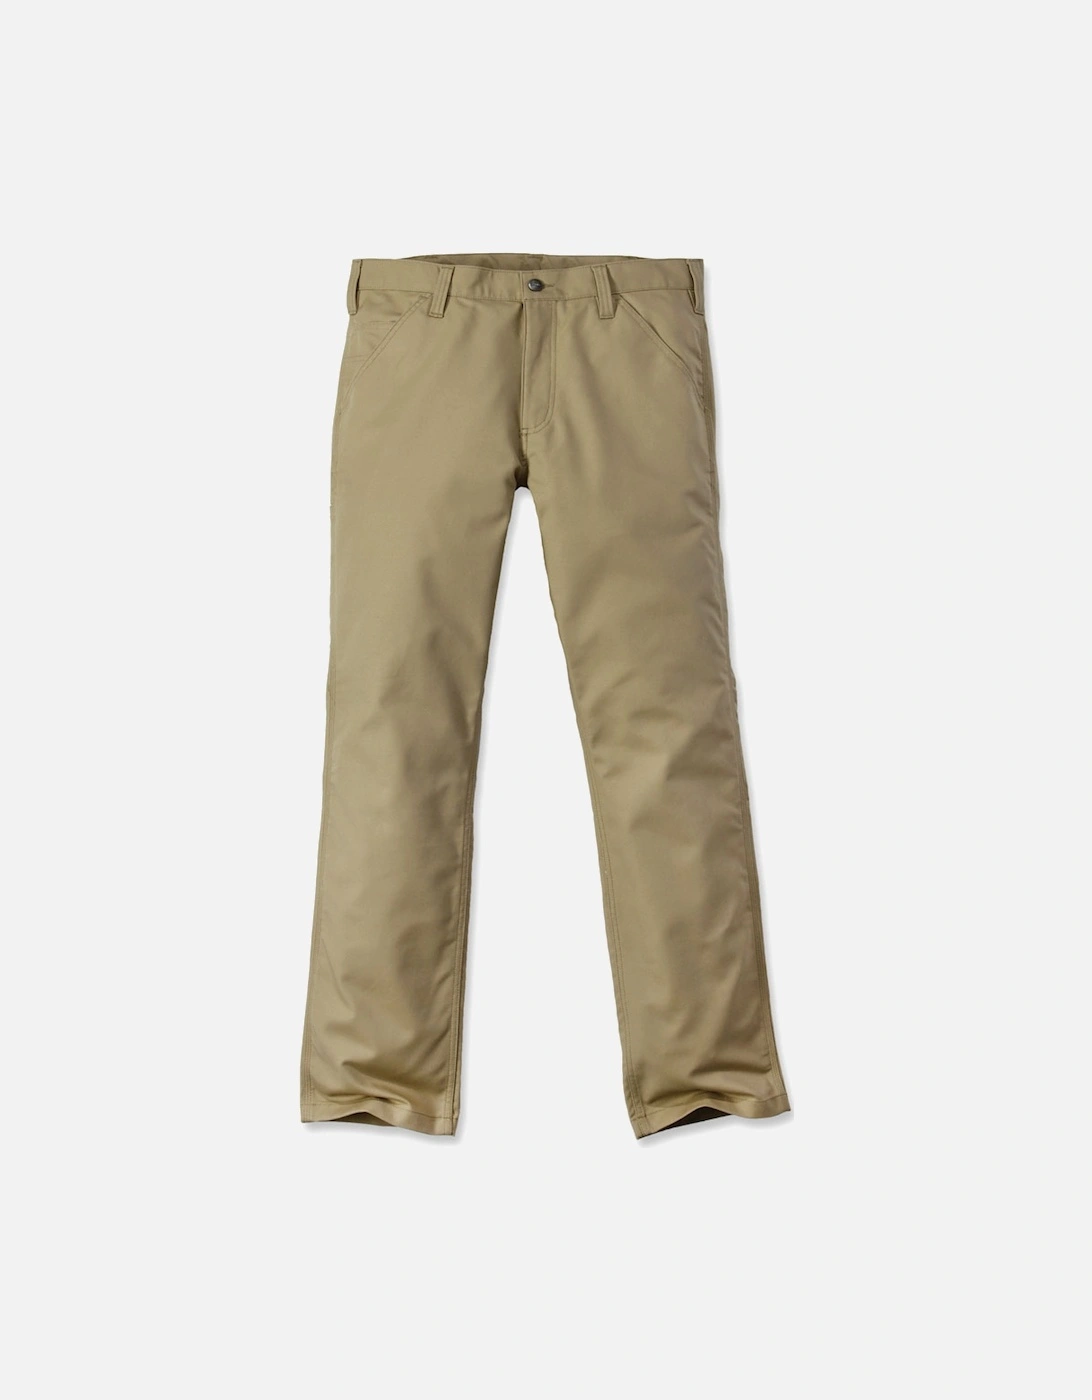 Carhartt Mens Rugged Stretch Relaxed Fit Chino Trousers